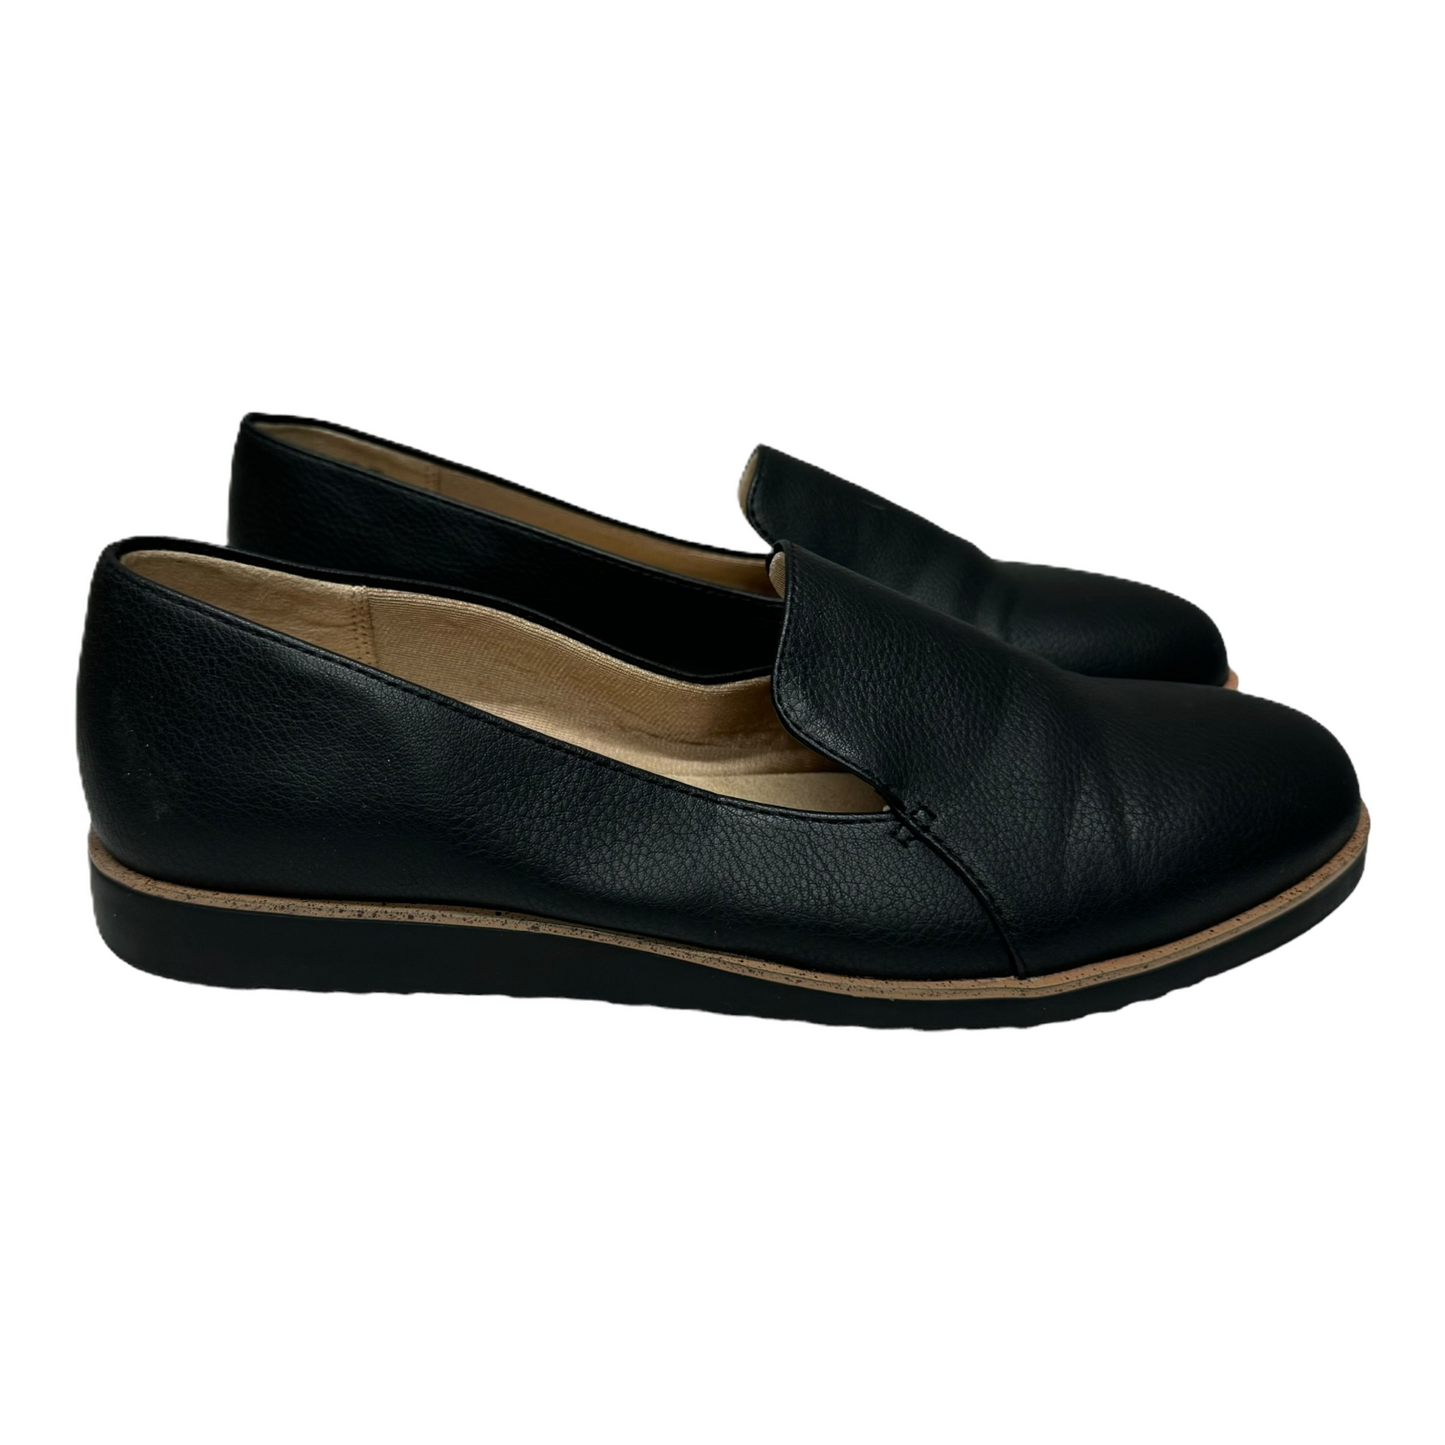 Black Shoes Flats By Life Stride, Size: 8